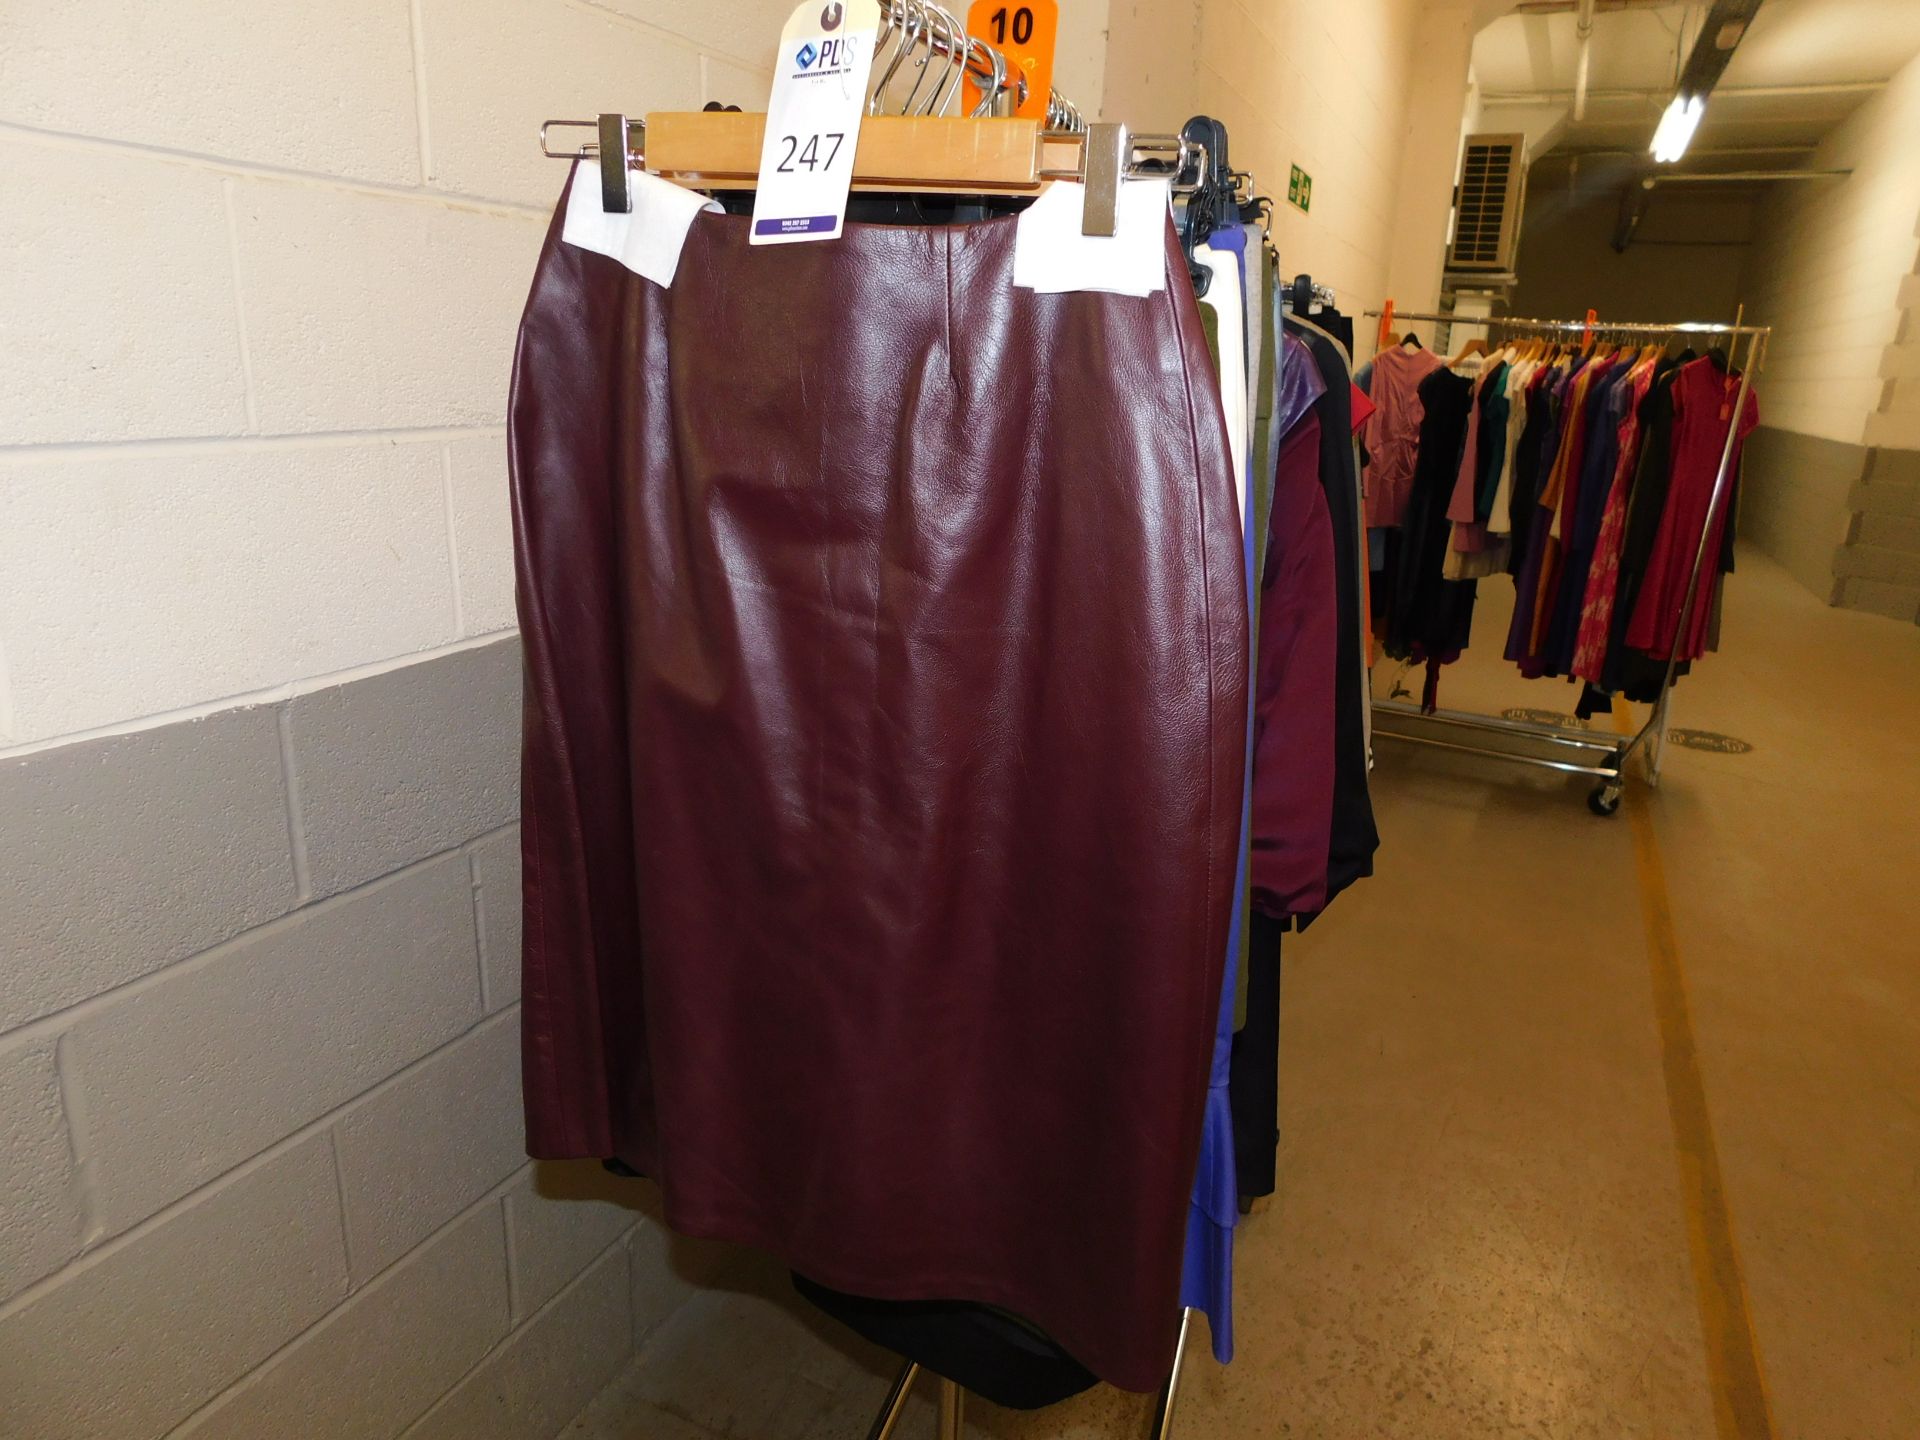 Contents of Rail of "Number 35" Ladies Business Wear, Size 10 (21 Skirts, 9 Tops/Dresses,  11 Jacket - Image 2 of 7